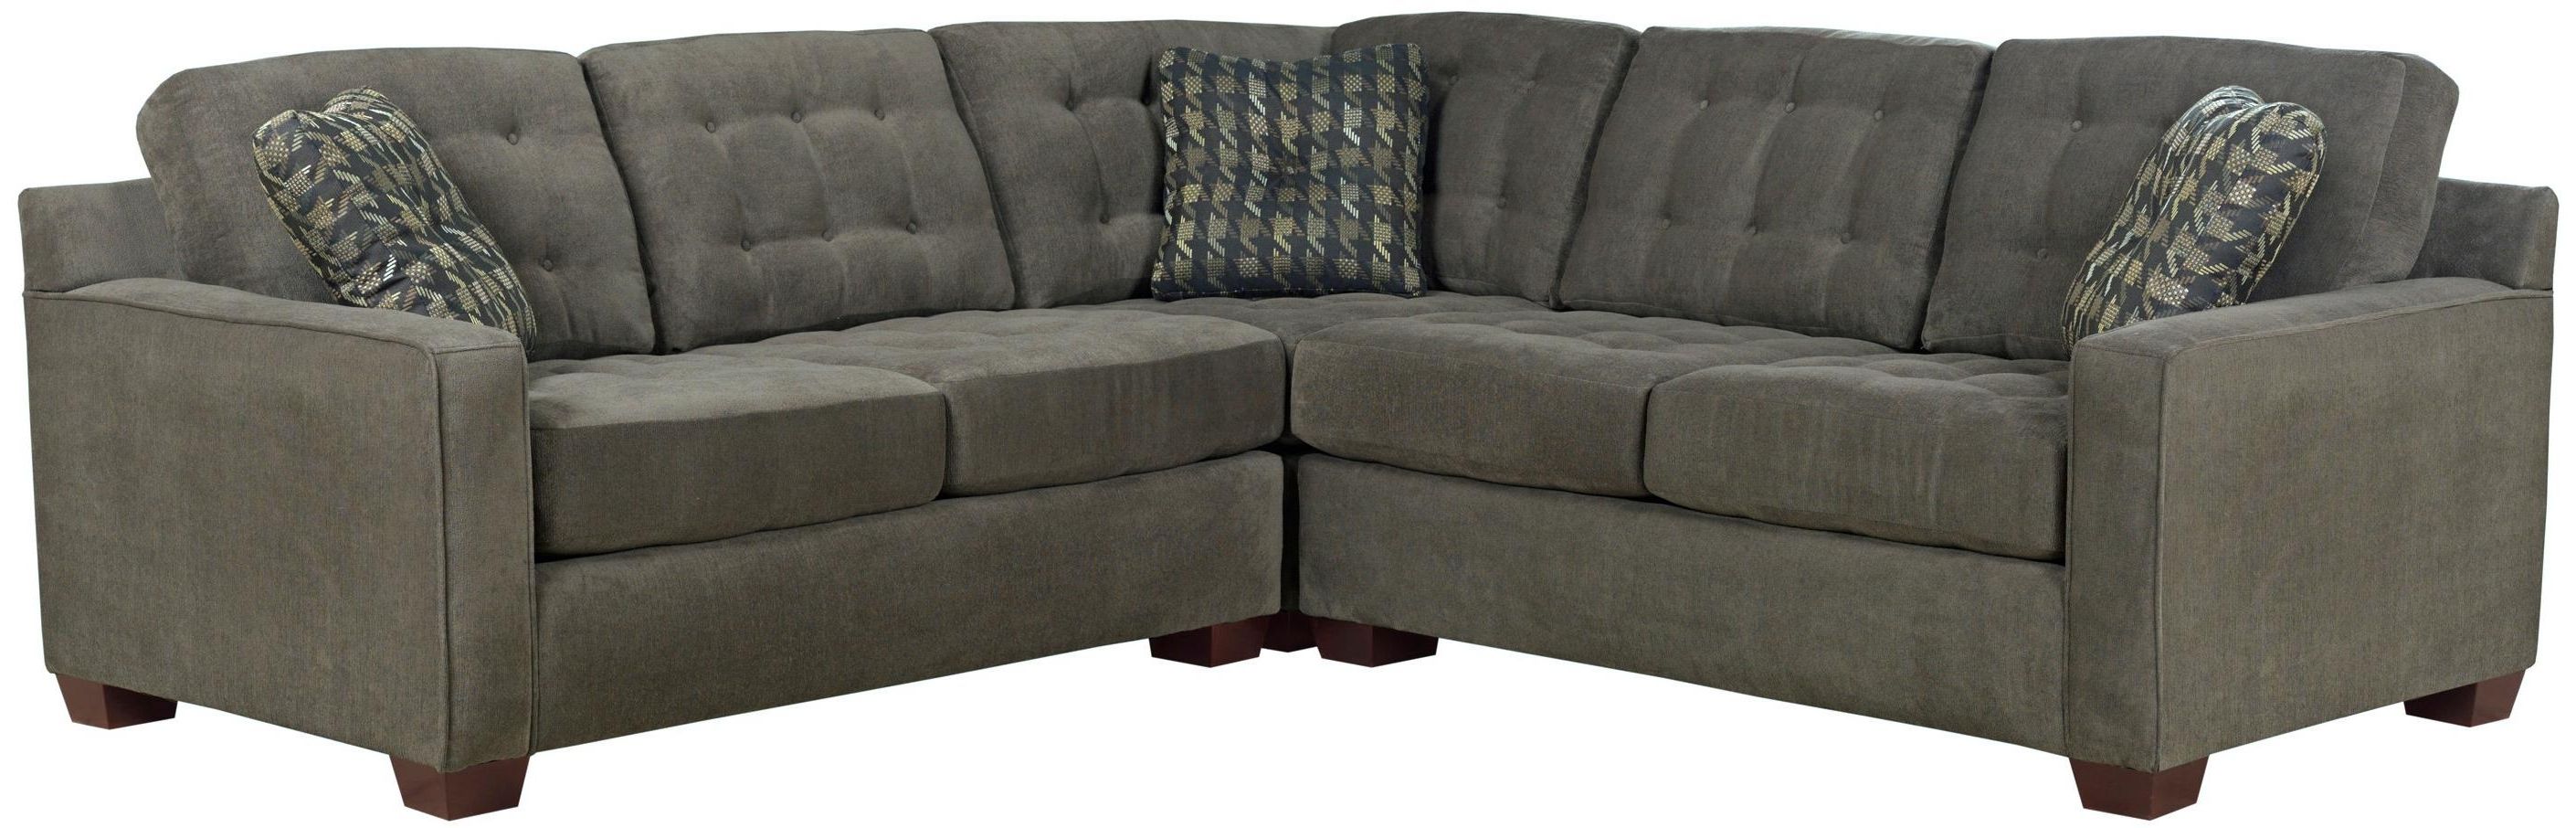 Famous Sam Levitz Sectional Sofas Pertaining To Broyhill Furniture Tribeca Contemporary L Shaped Sectional Sofa (View 11 of 20)